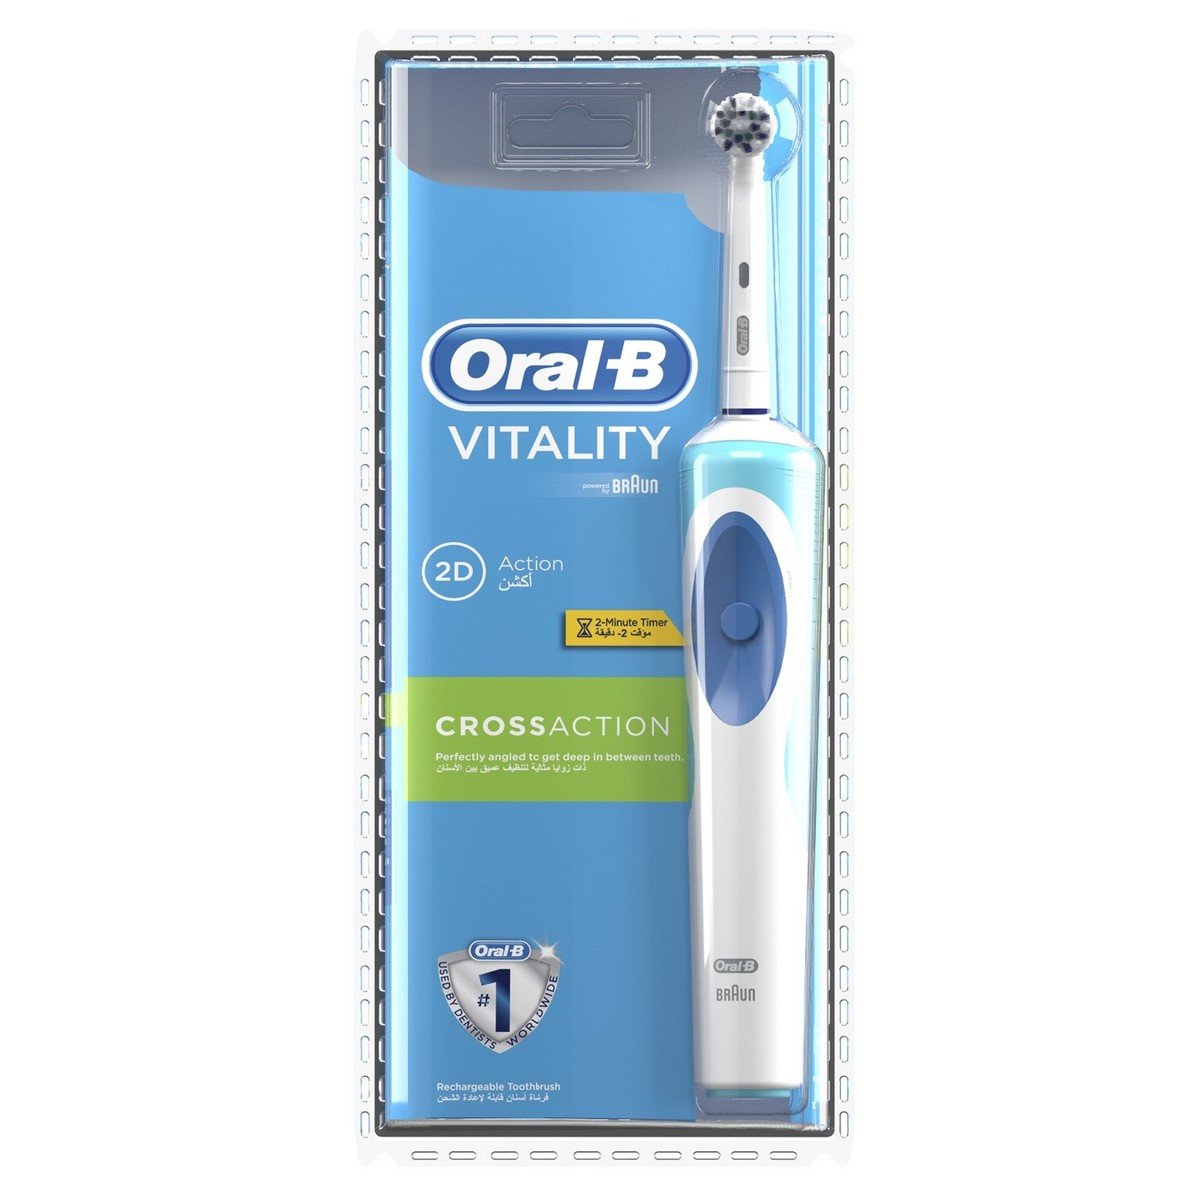 Oral-B Vitality CrossAction Electric Rechargeable Toothbrush Powered by Braun Assorted Color